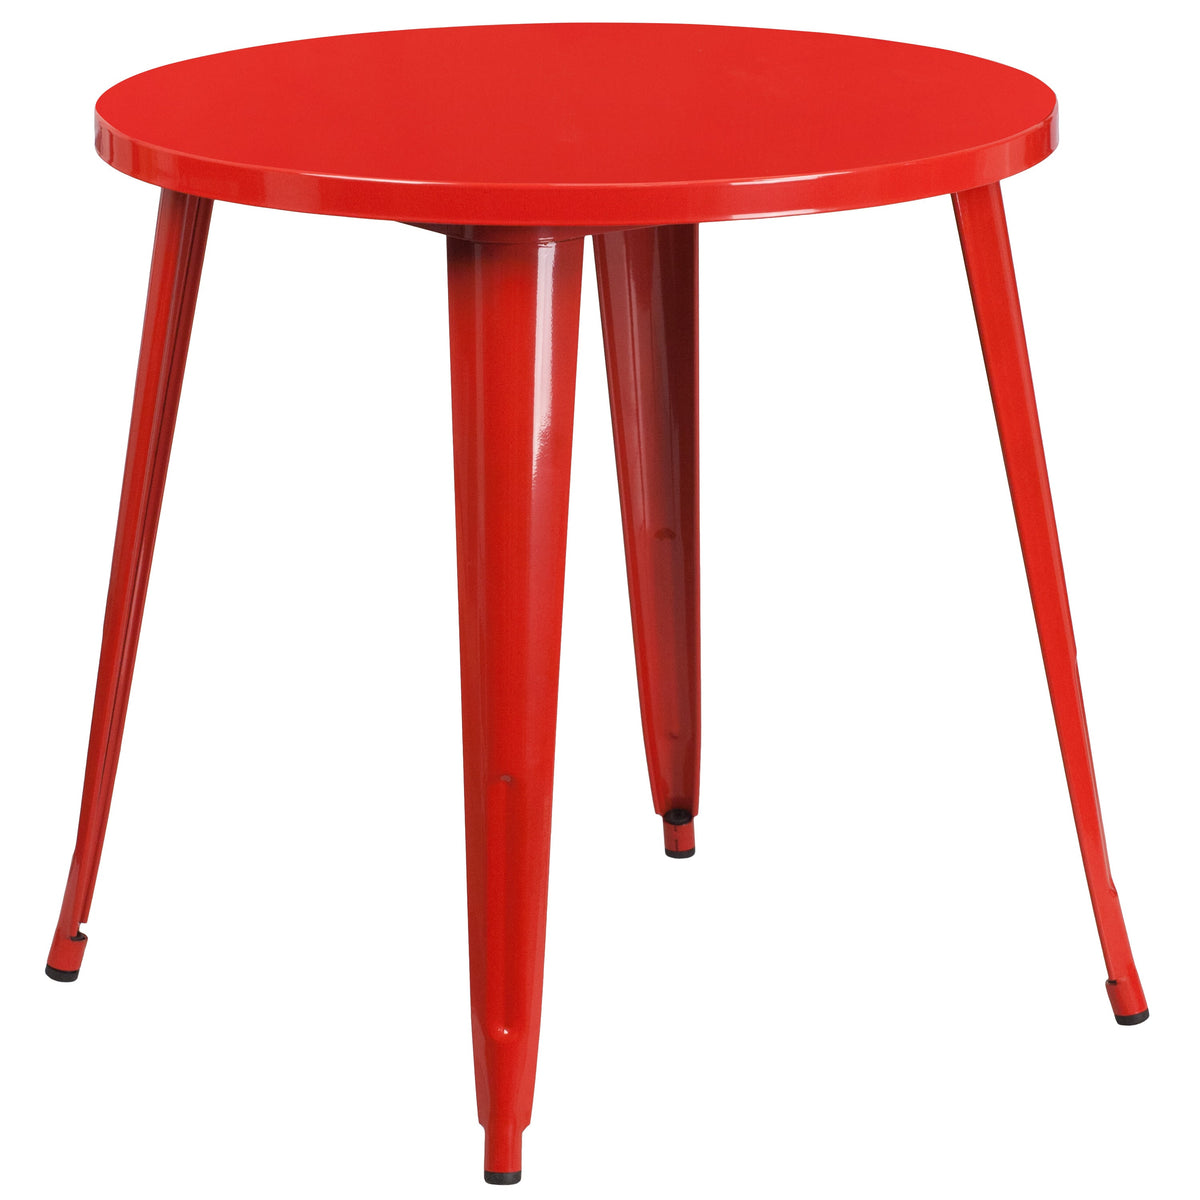 Red |#| 30inch Round Red Metal Indoor-Outdoor Table - Restaurant Furniture